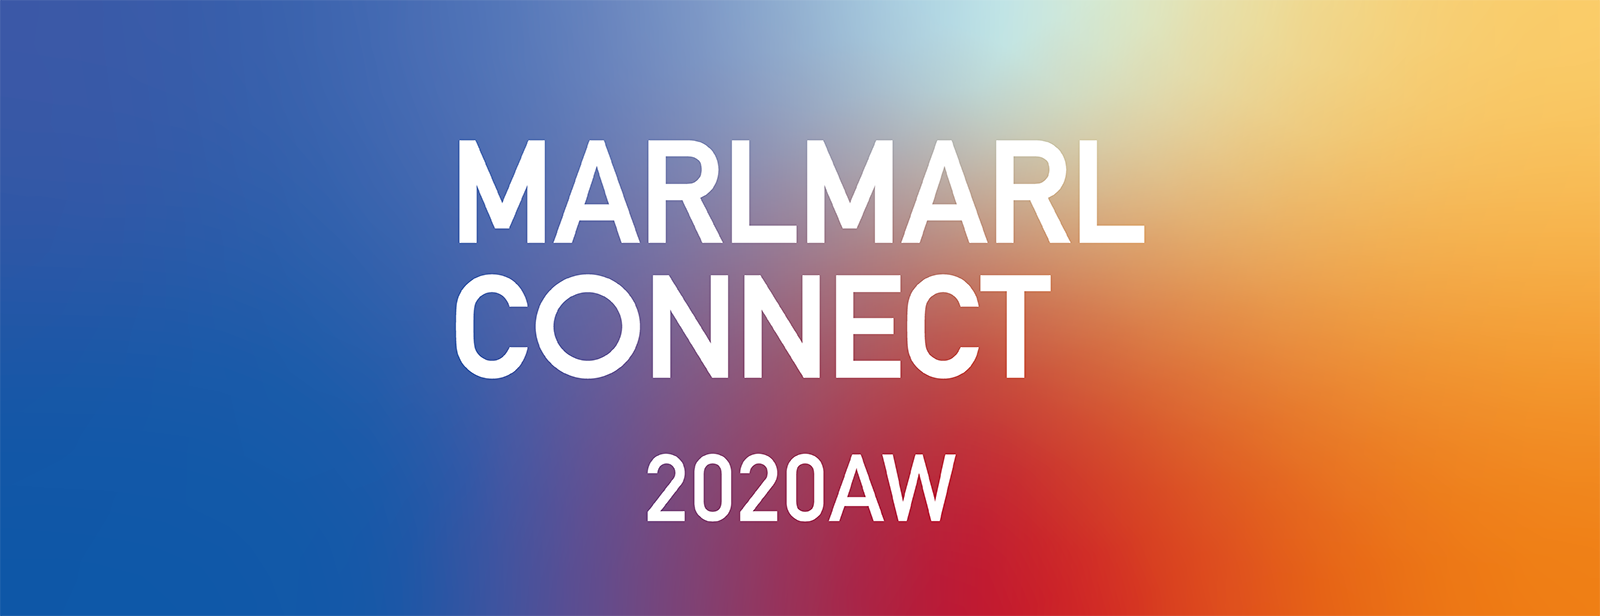 MARLMARL CONNECT 2020AW